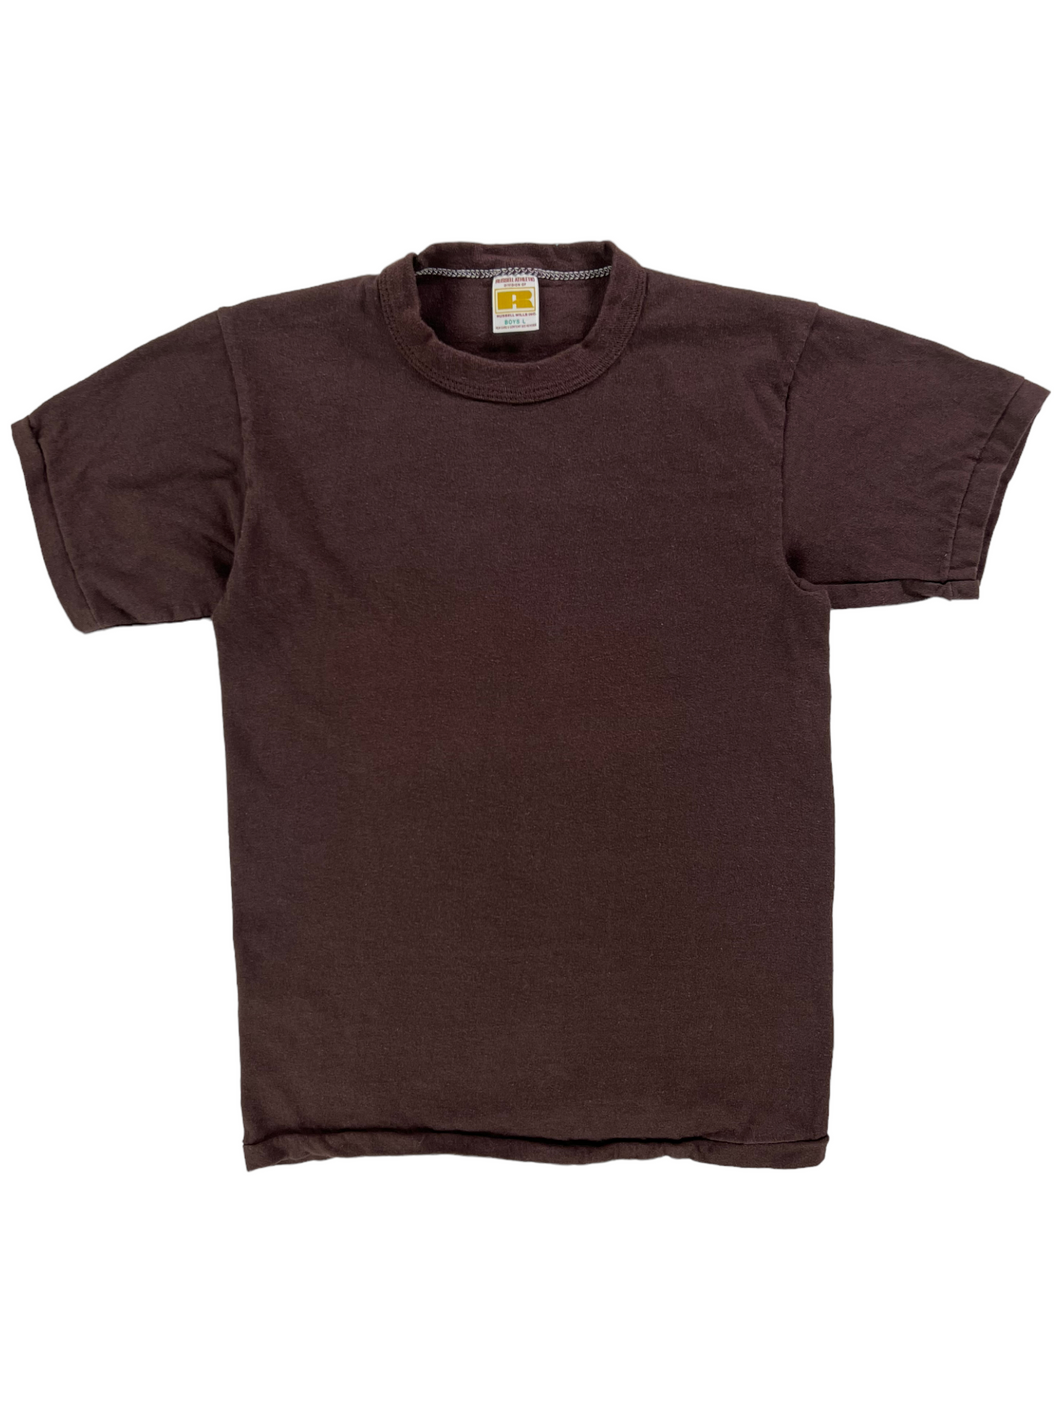 Vintage 70s Russell Athletic YOUTH blank brown tee (Boys L)